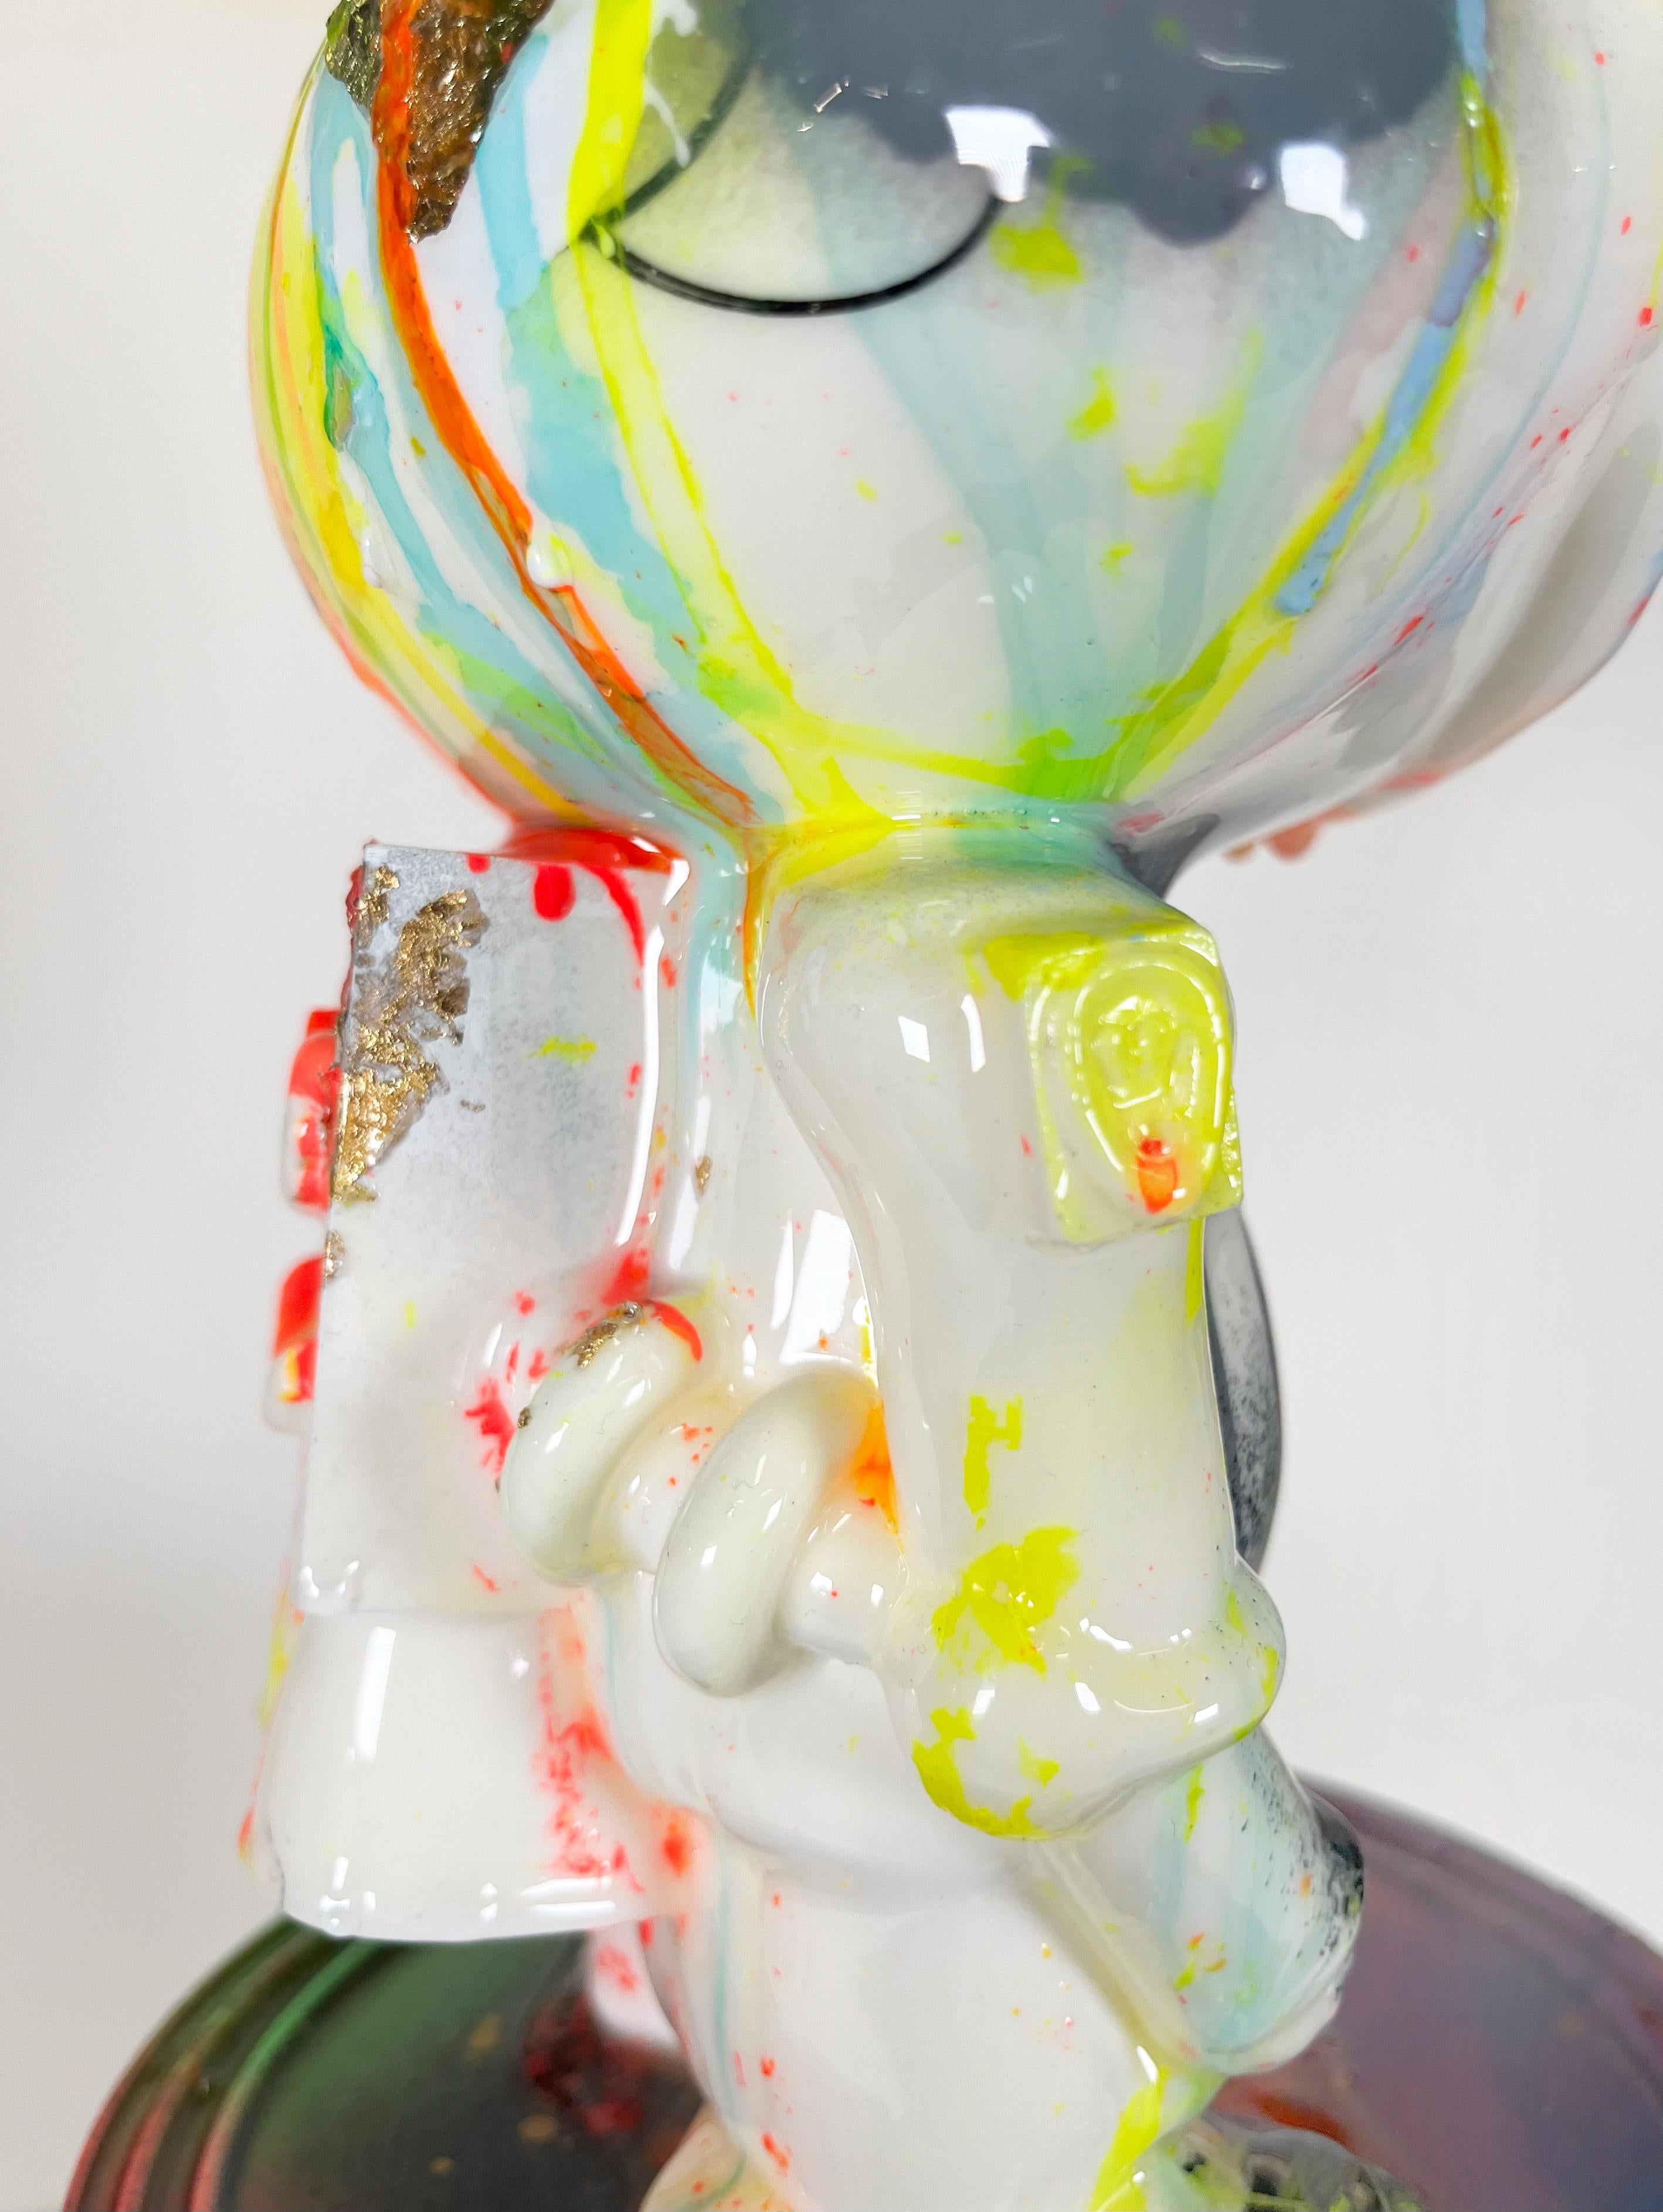 This charming little guy is a hand painted 1/1 resin 